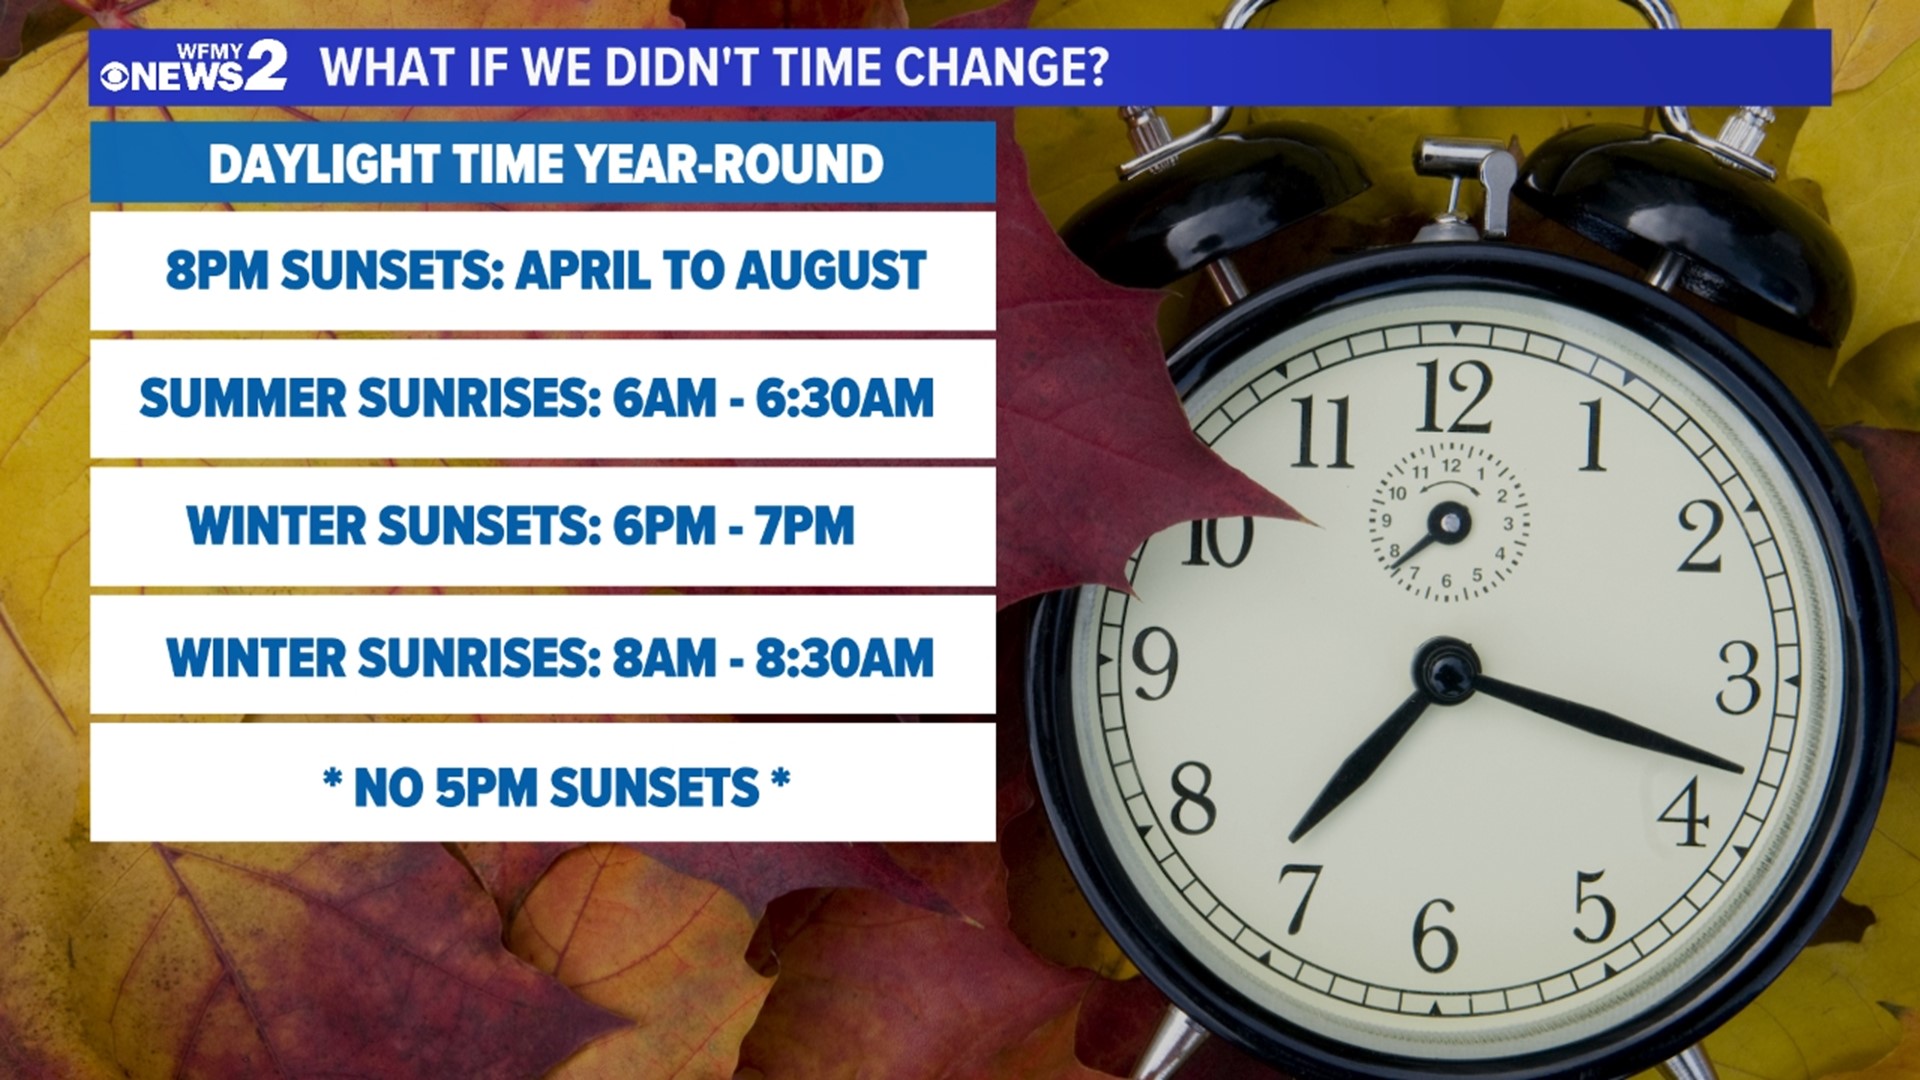 Set Your Clocks Forward Tonight: Daylight Saving Time, Which Congress Could  Make Permanent